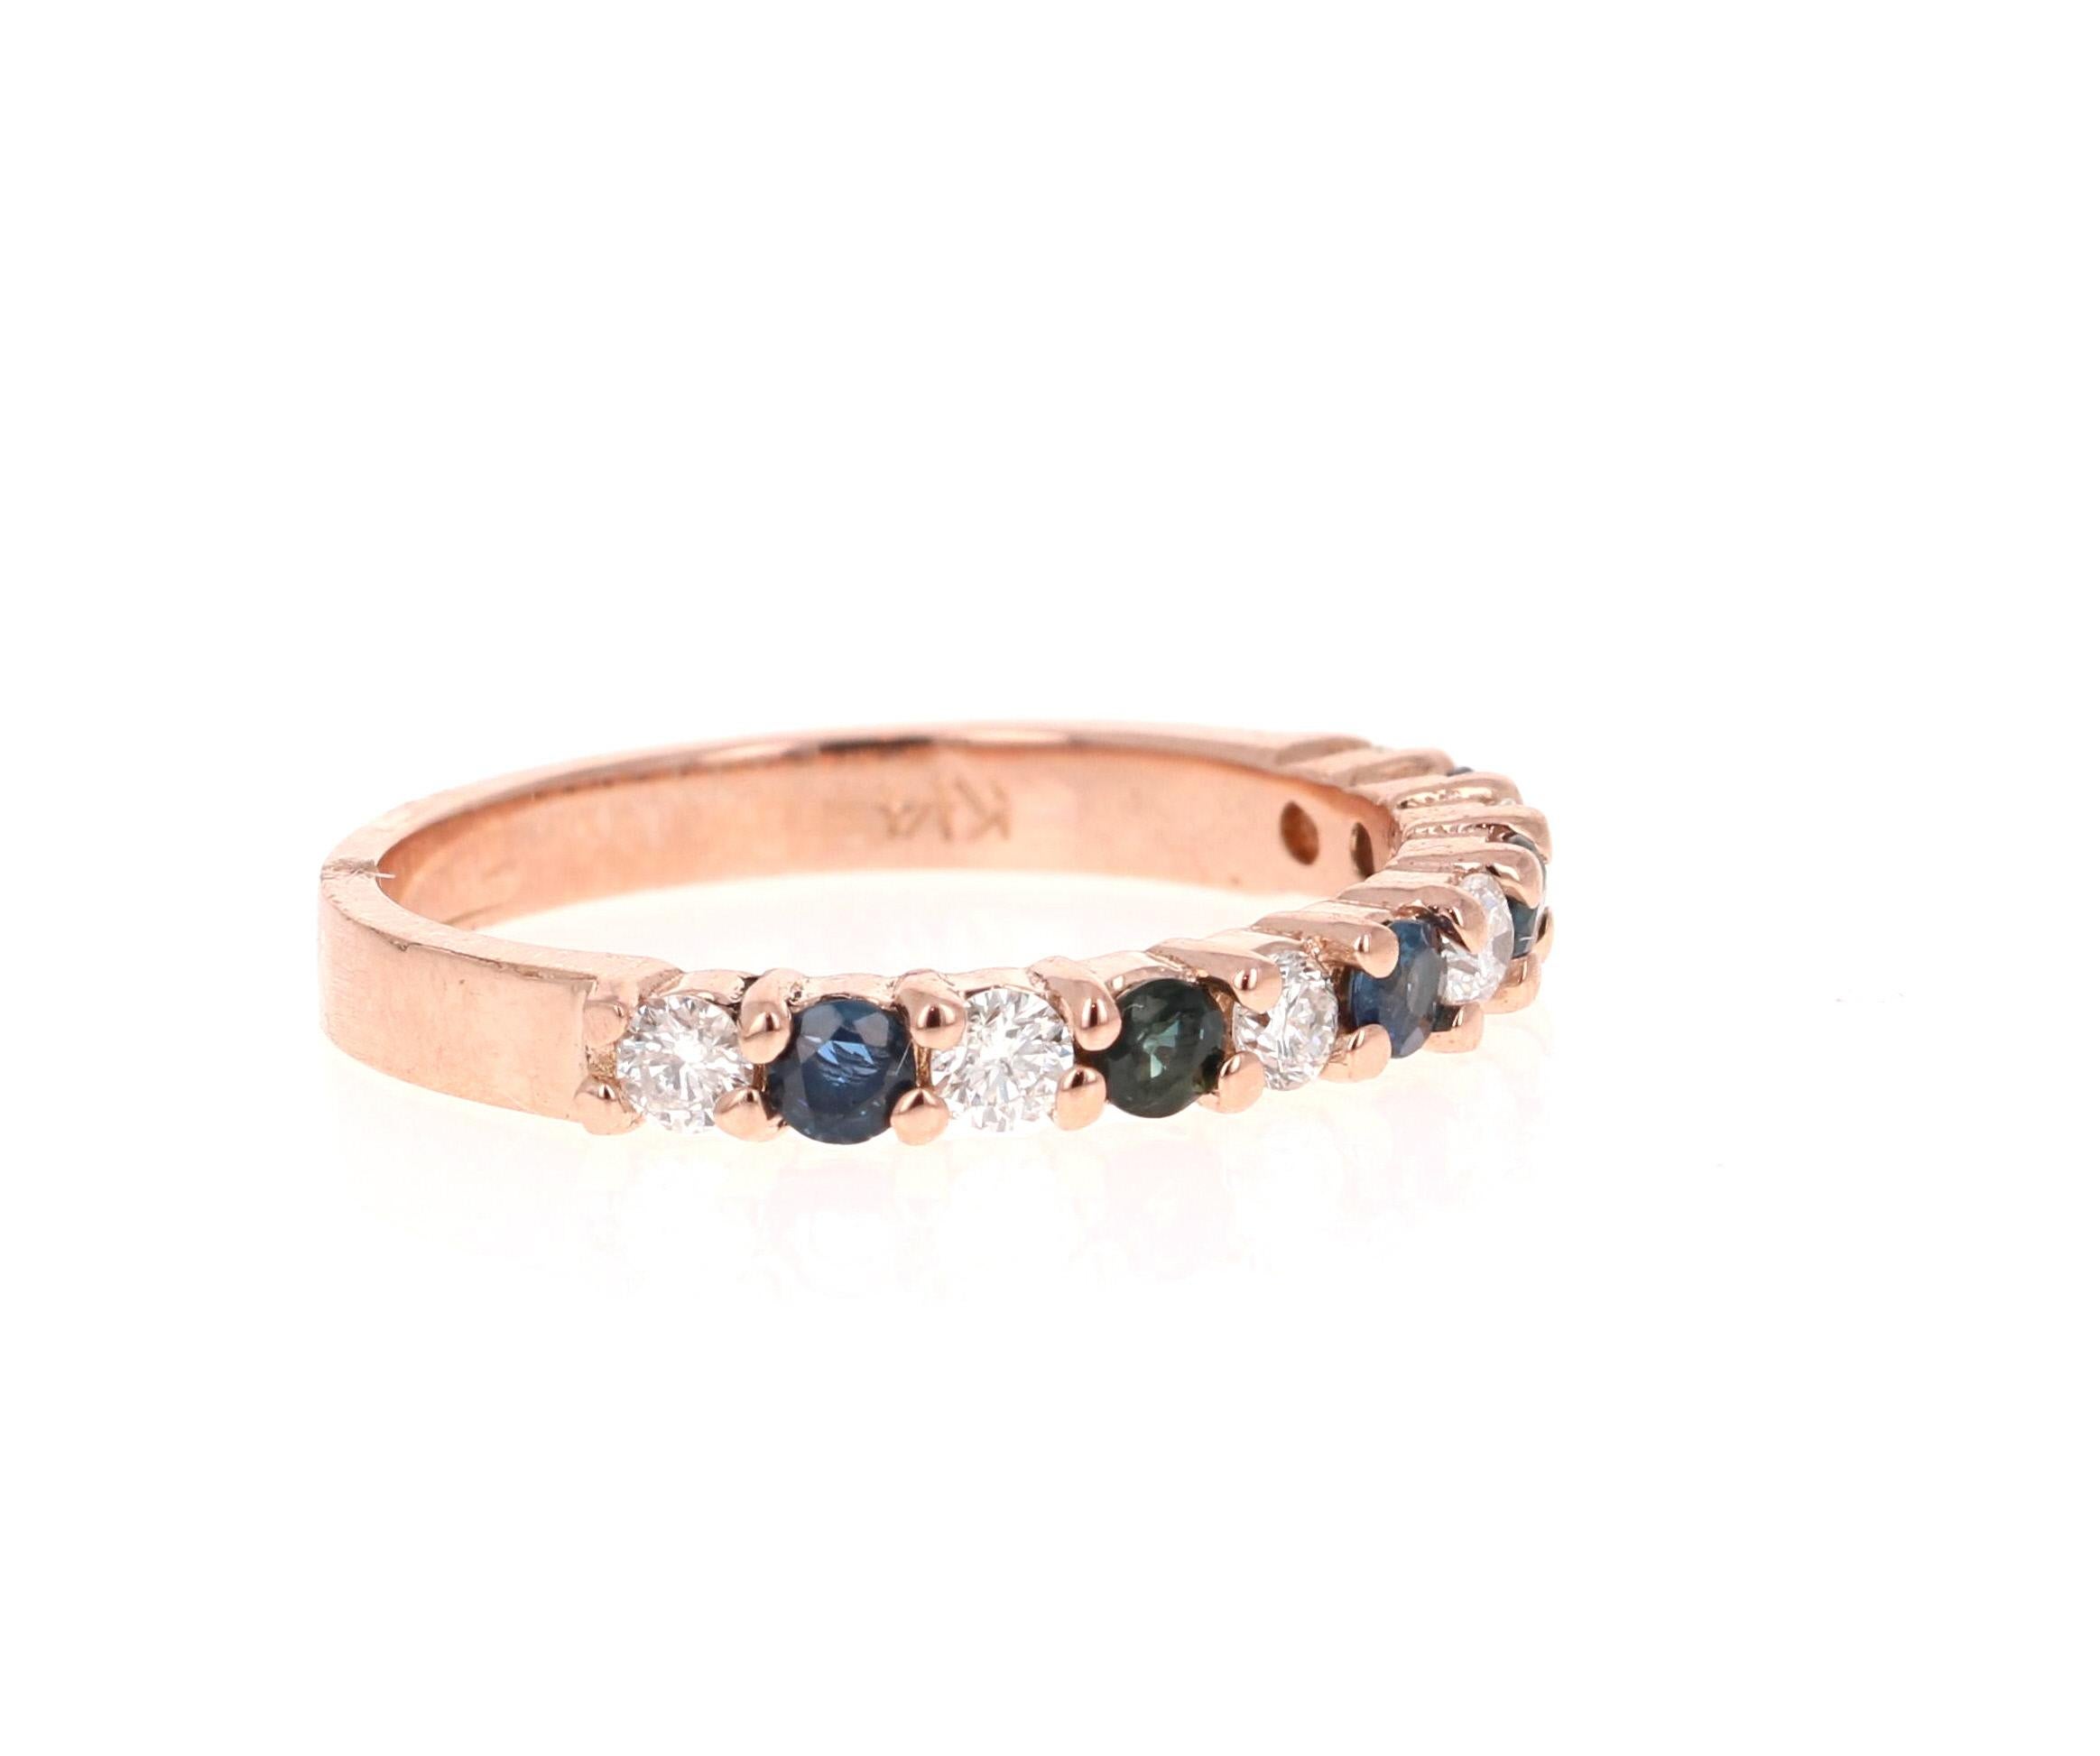 0.60 Carat Sapphire and Diamond 14K Rose Gold Band.

This is a classic band that is a must-have!
It has 5 Sapphires that weigh 0.32 Carats and 6 Round Cut Diamonds that weigh 0.28 Carats. (Clarity: SI, Color: F) The Total Carat Weight of the Band is